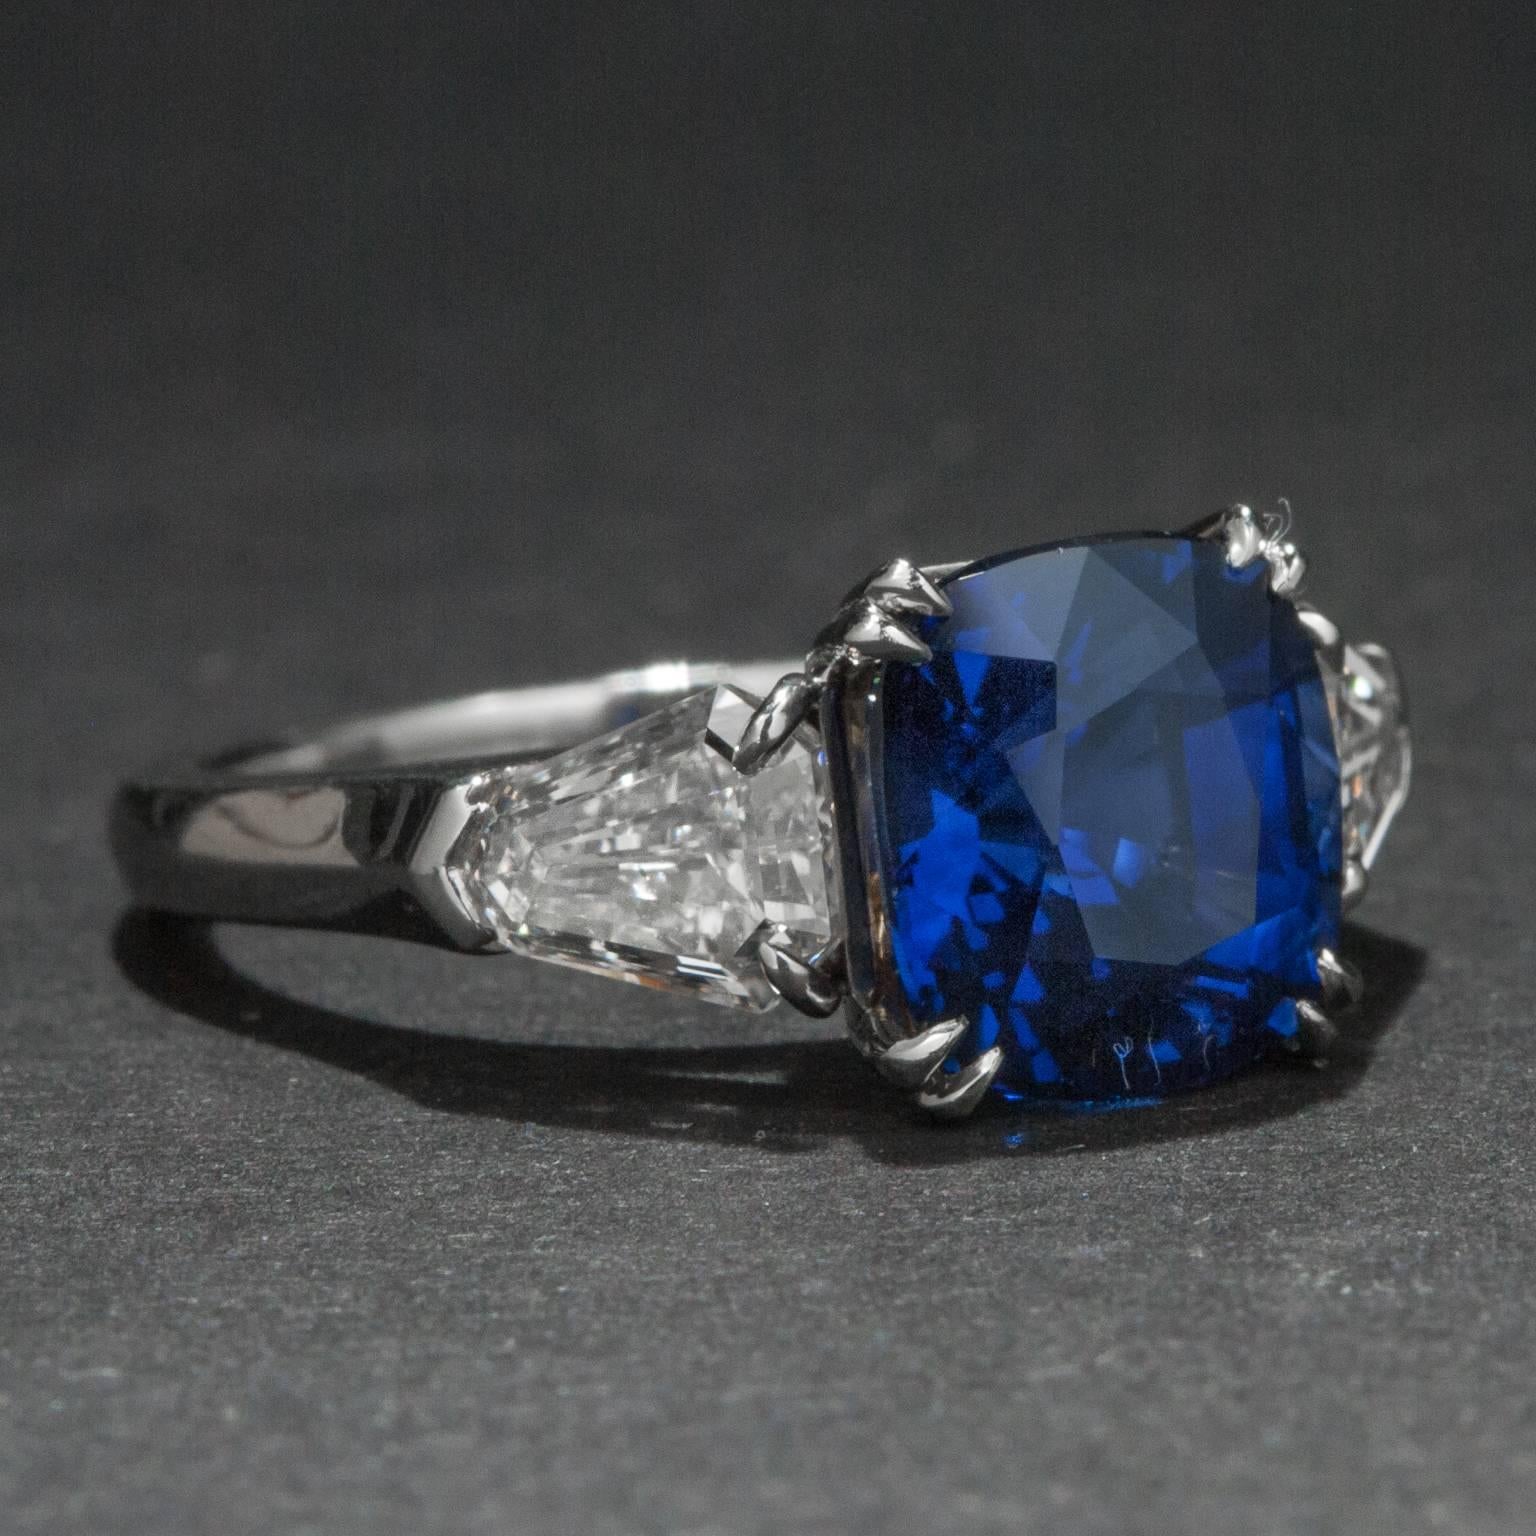 A lovely sapphire ring with tantalizing medium blue color. The cushion cut sapphire that sits at the ring's center weighs 4.19 carats and it is flanked by two beautiful diamonds weighing a total of 1.20 carats. The ring is crafted in platinum and is